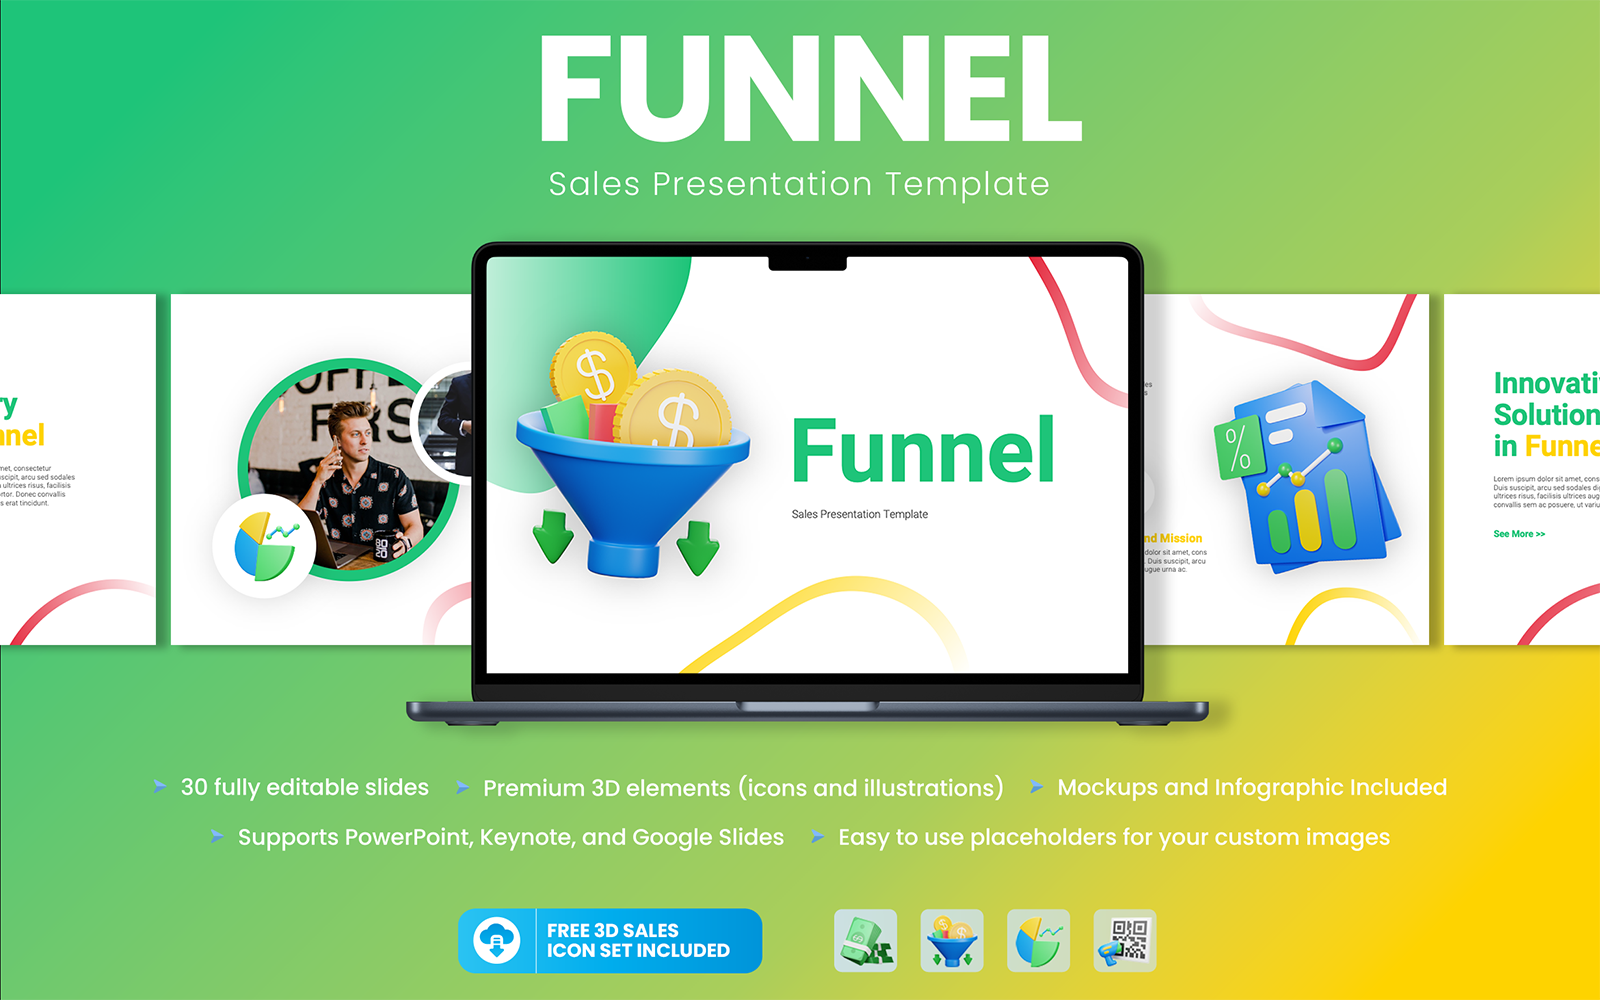 Funnel - Sales Presentation PowerPoint Template